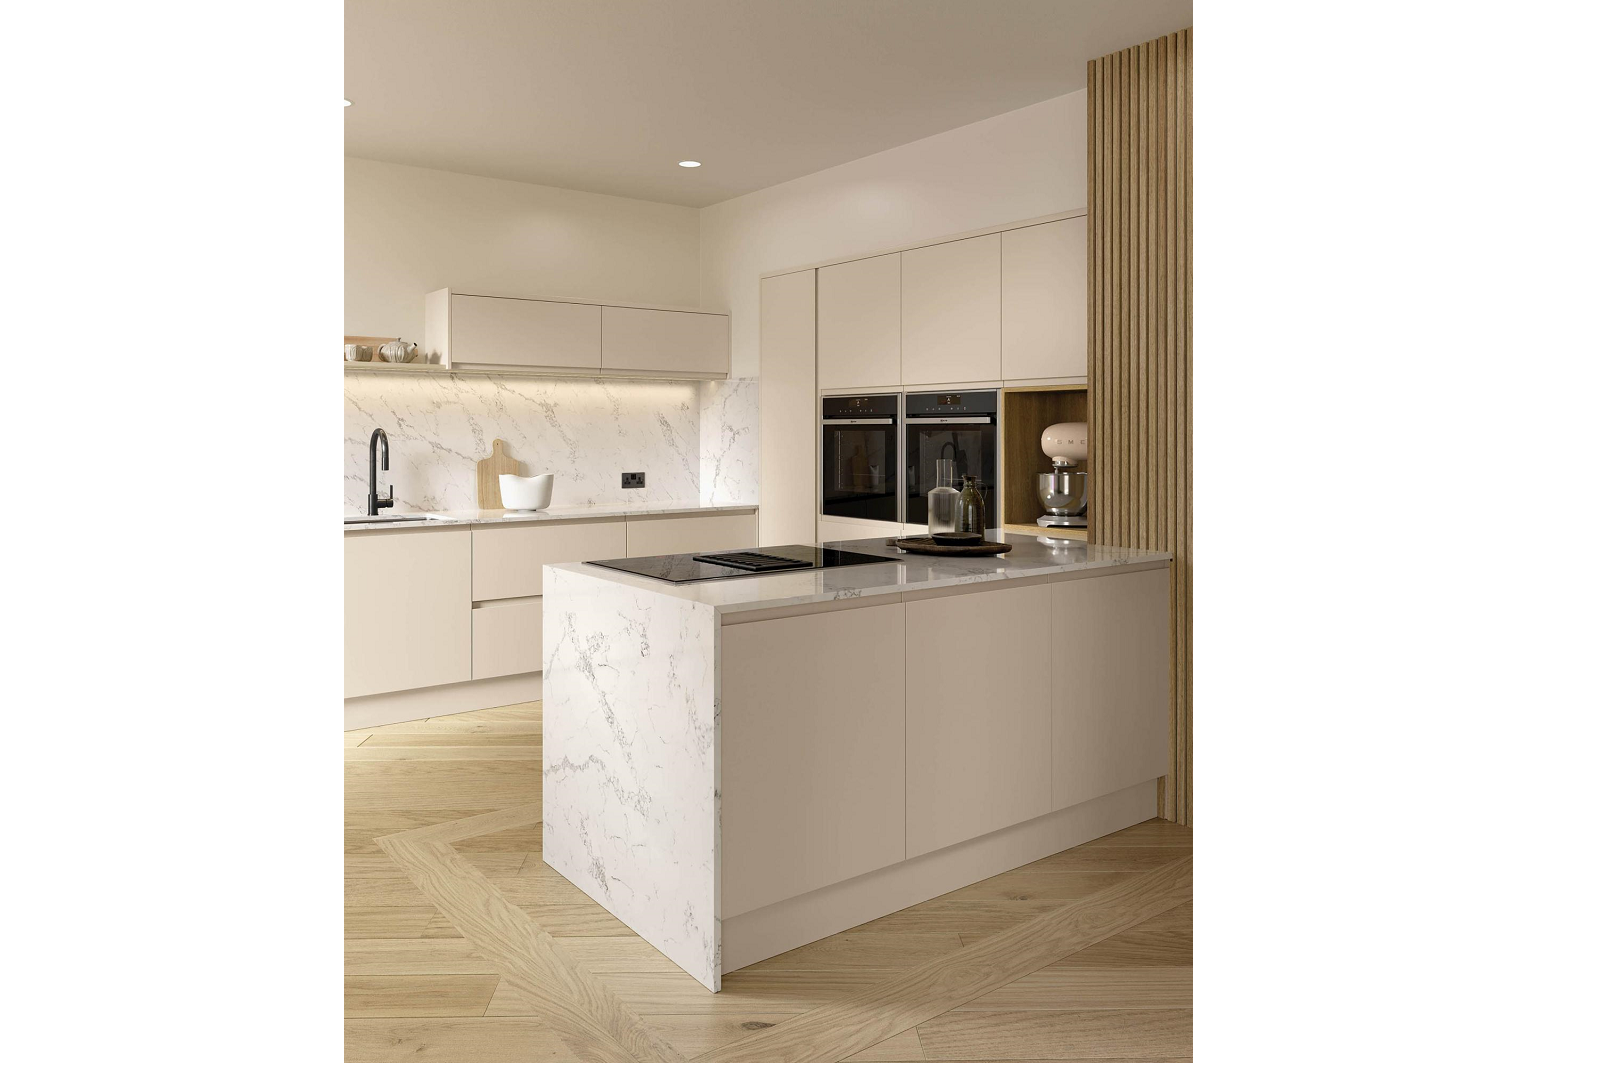 J-Pull Handleless kitchen painted matte cashmere featuring peninsula unit with induction hob 